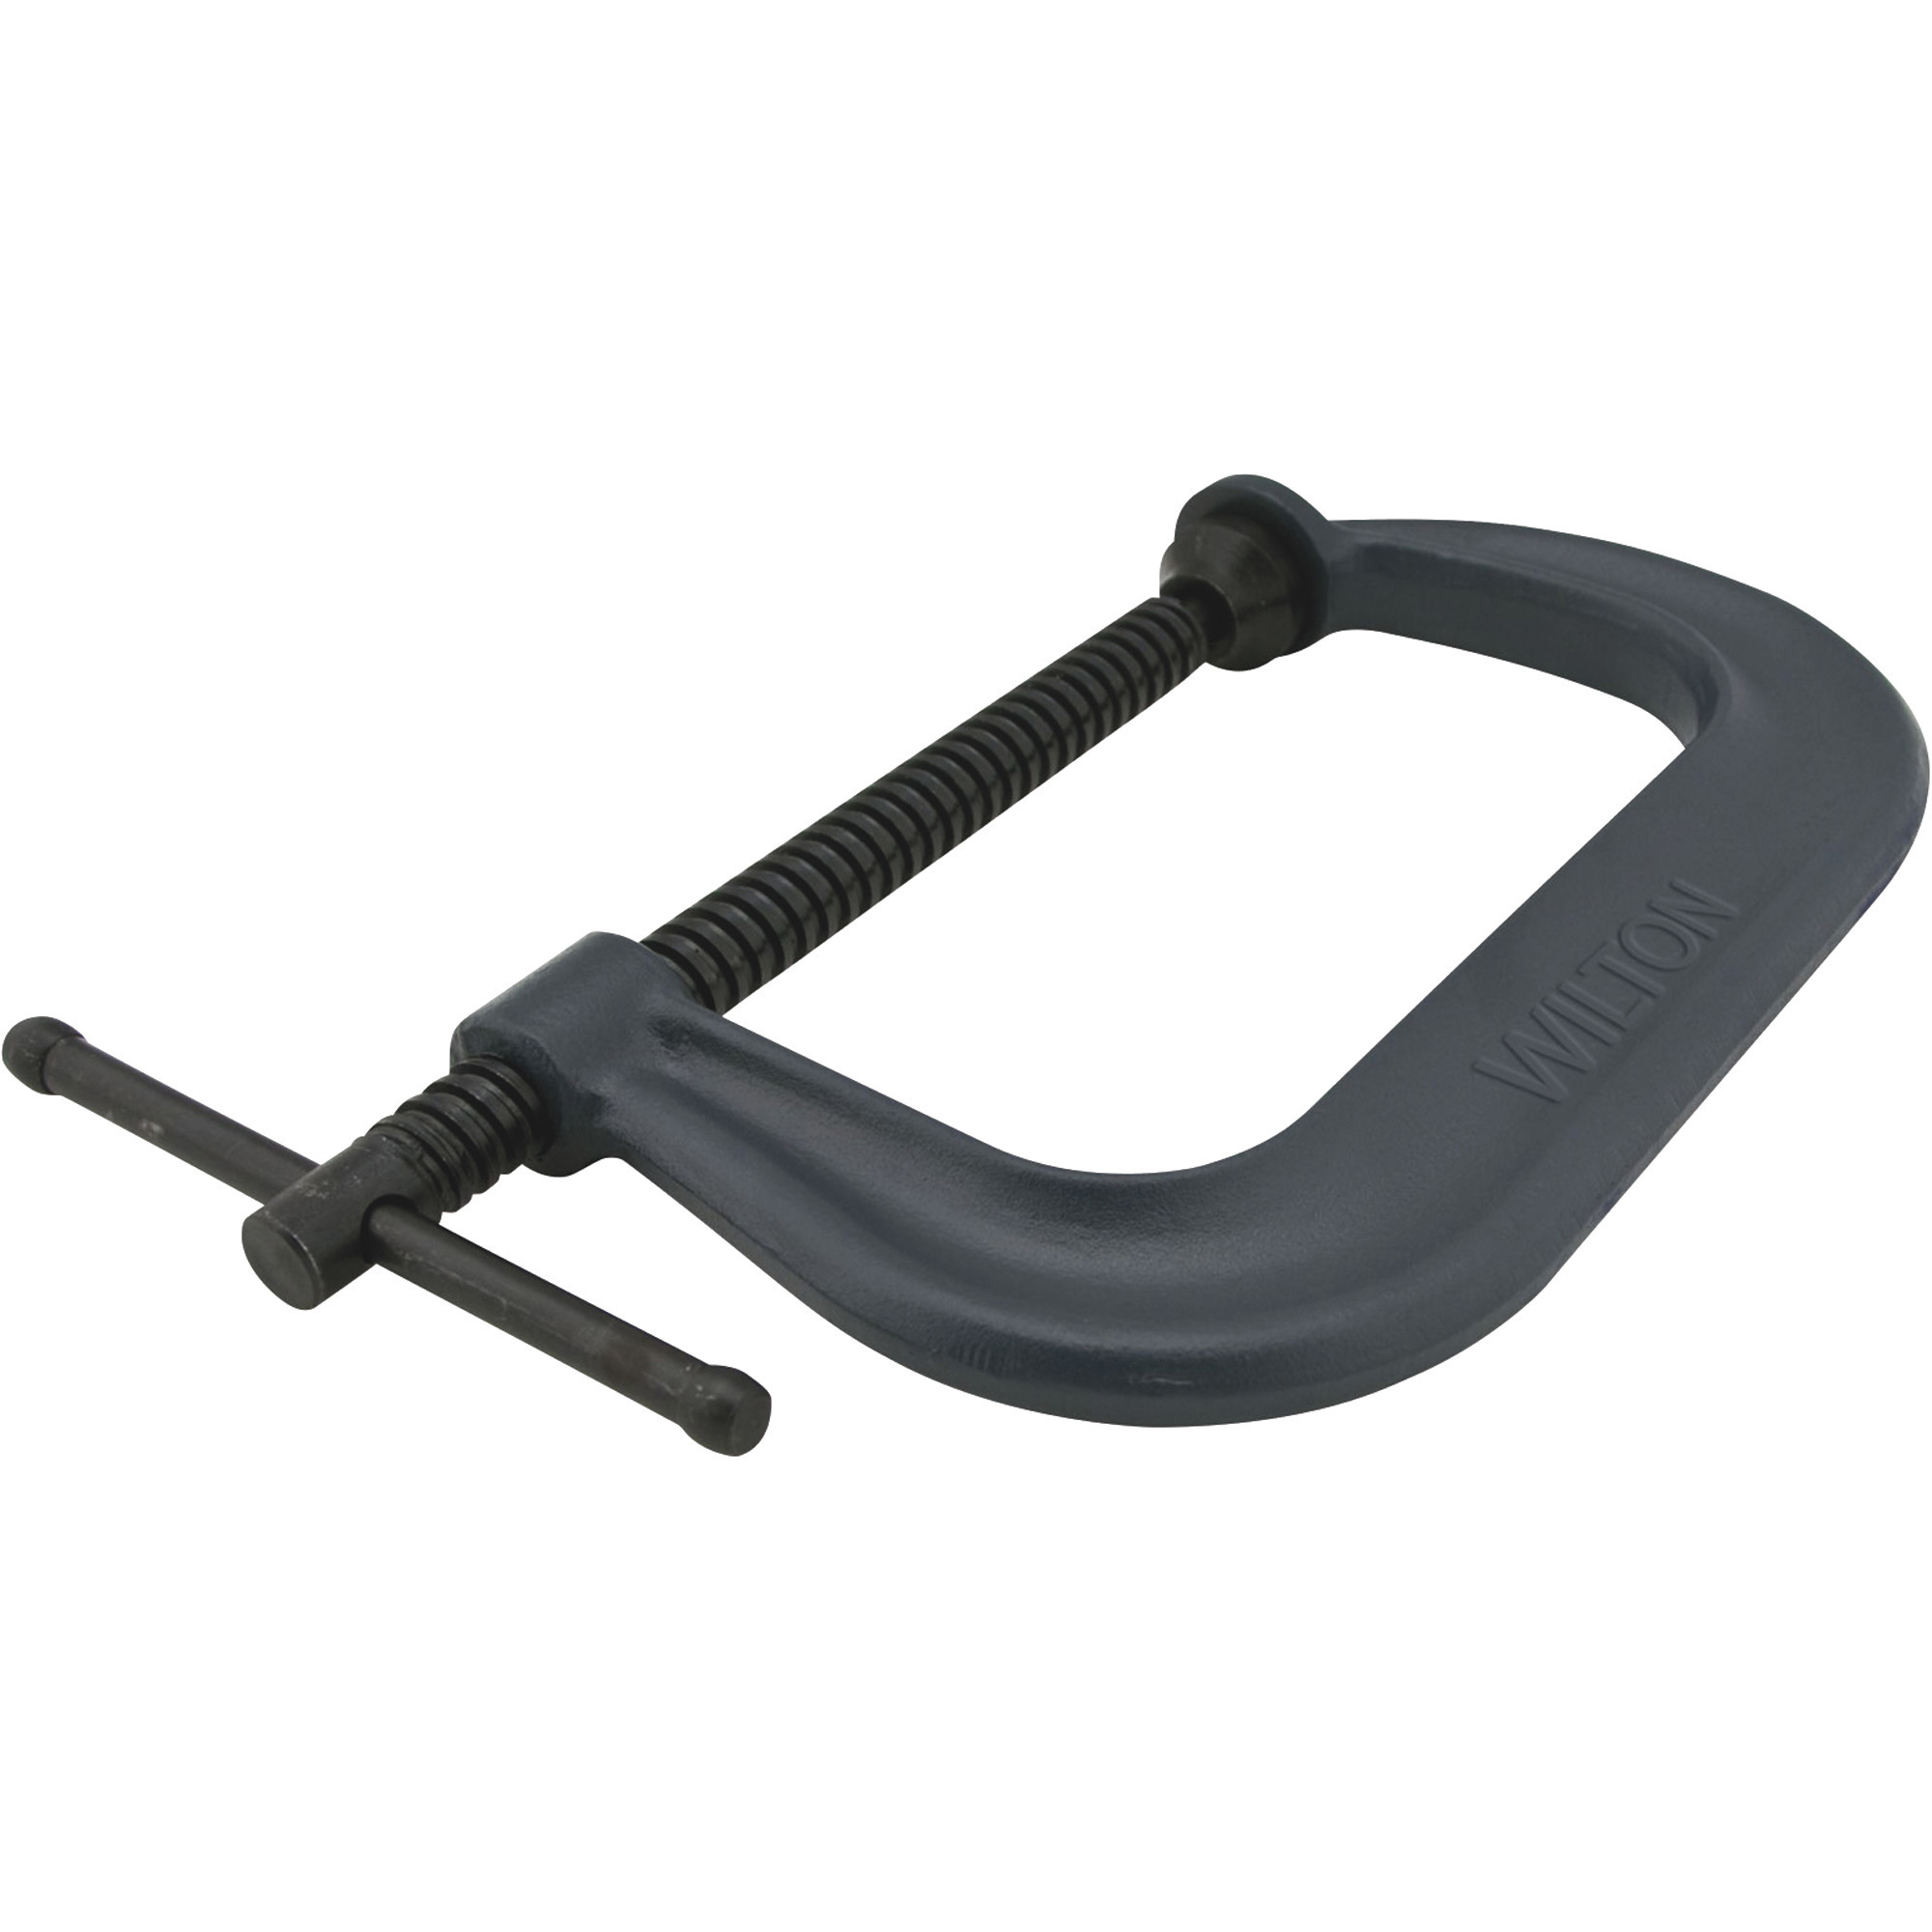 Wilton Classic 400 Series C-Clamp, 0-2 1/8Inch Opening, Model 402